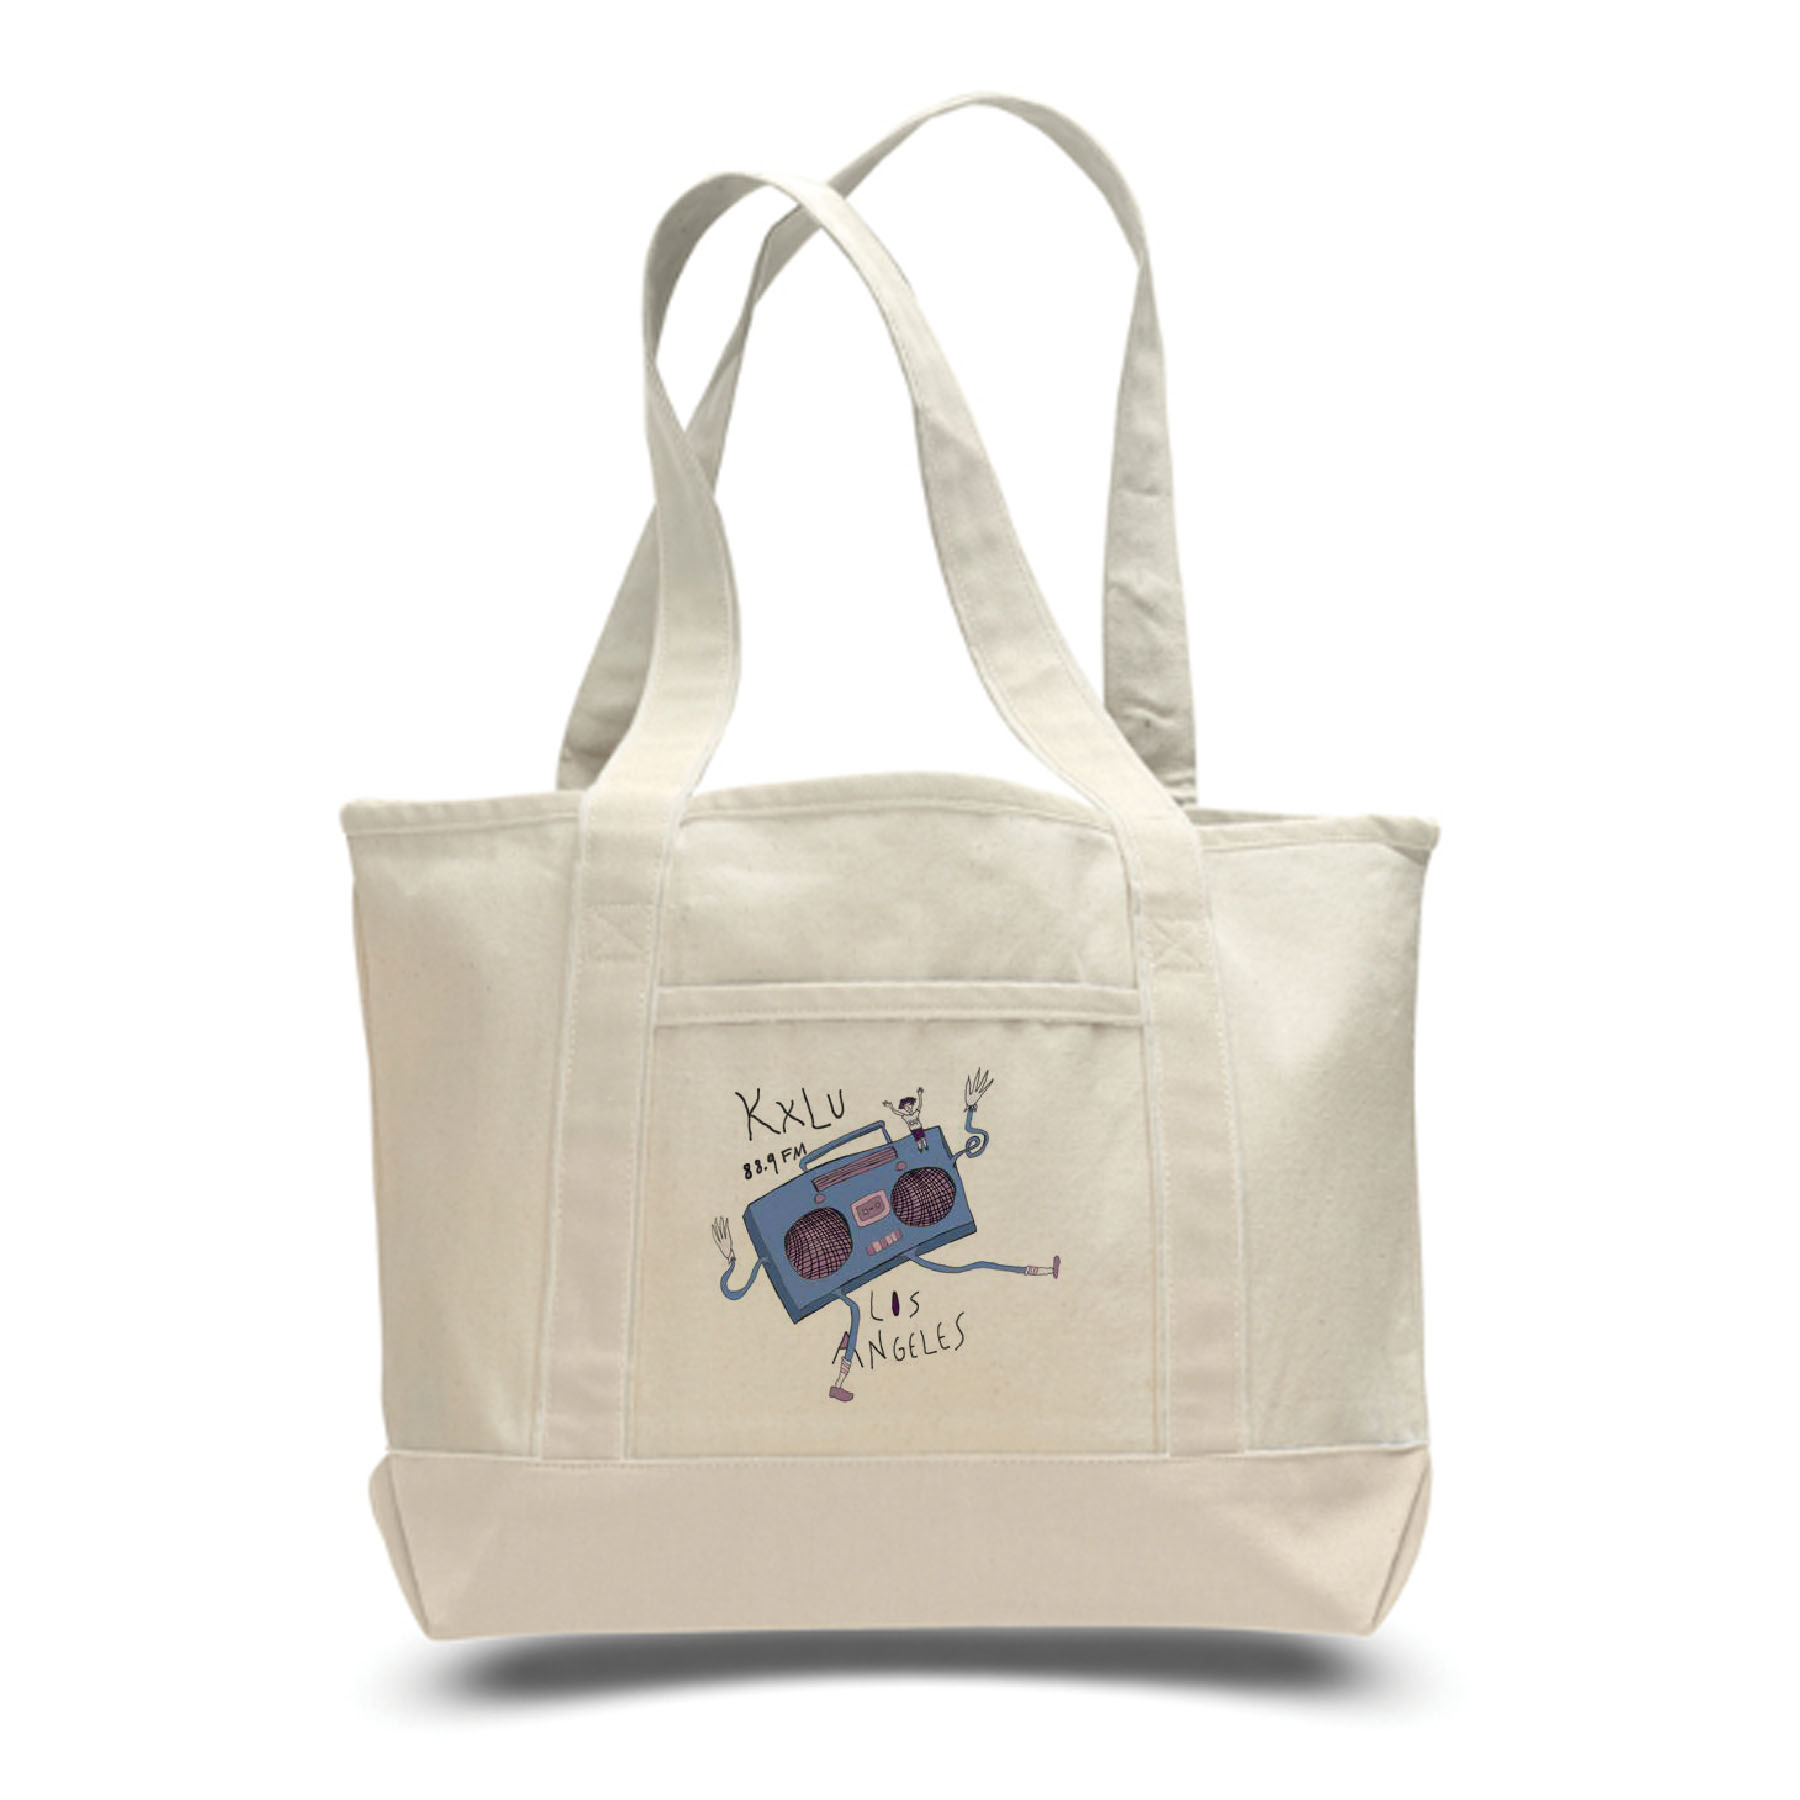 CanvasDeluxe Tote Bag